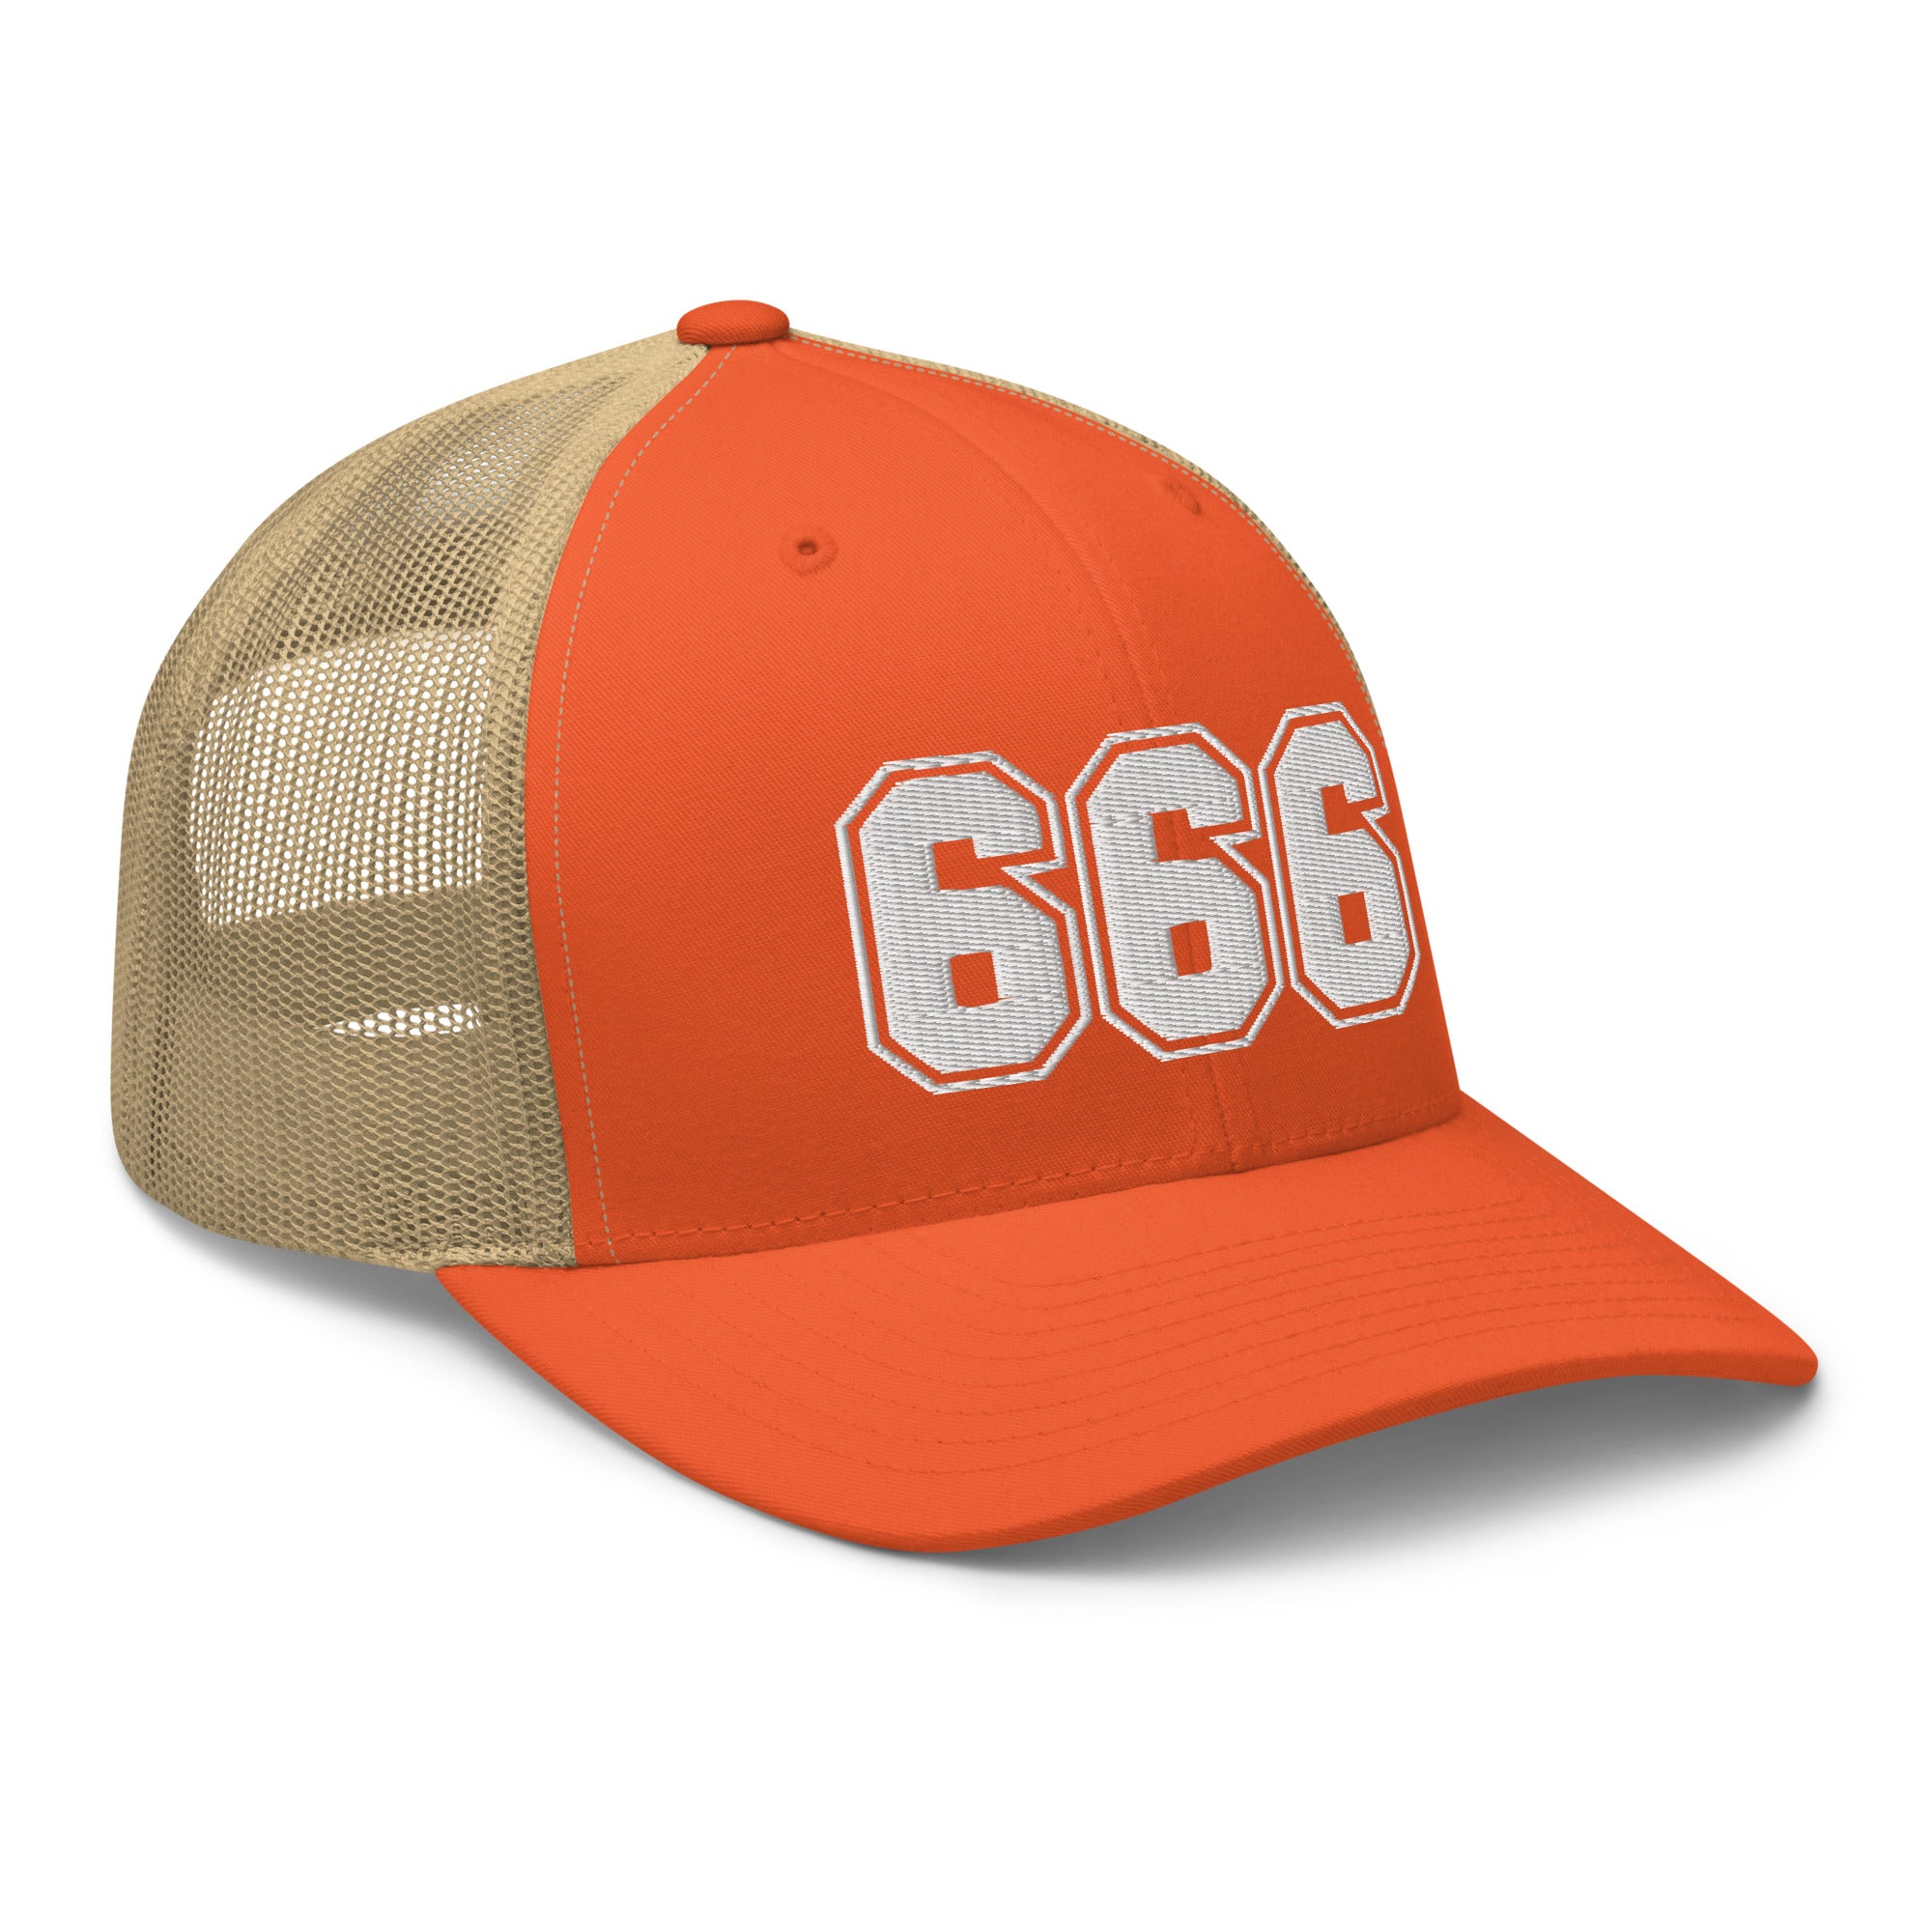 White 666 Number of the Beast Embroidered Retro Trucker Cap Snapback Hat